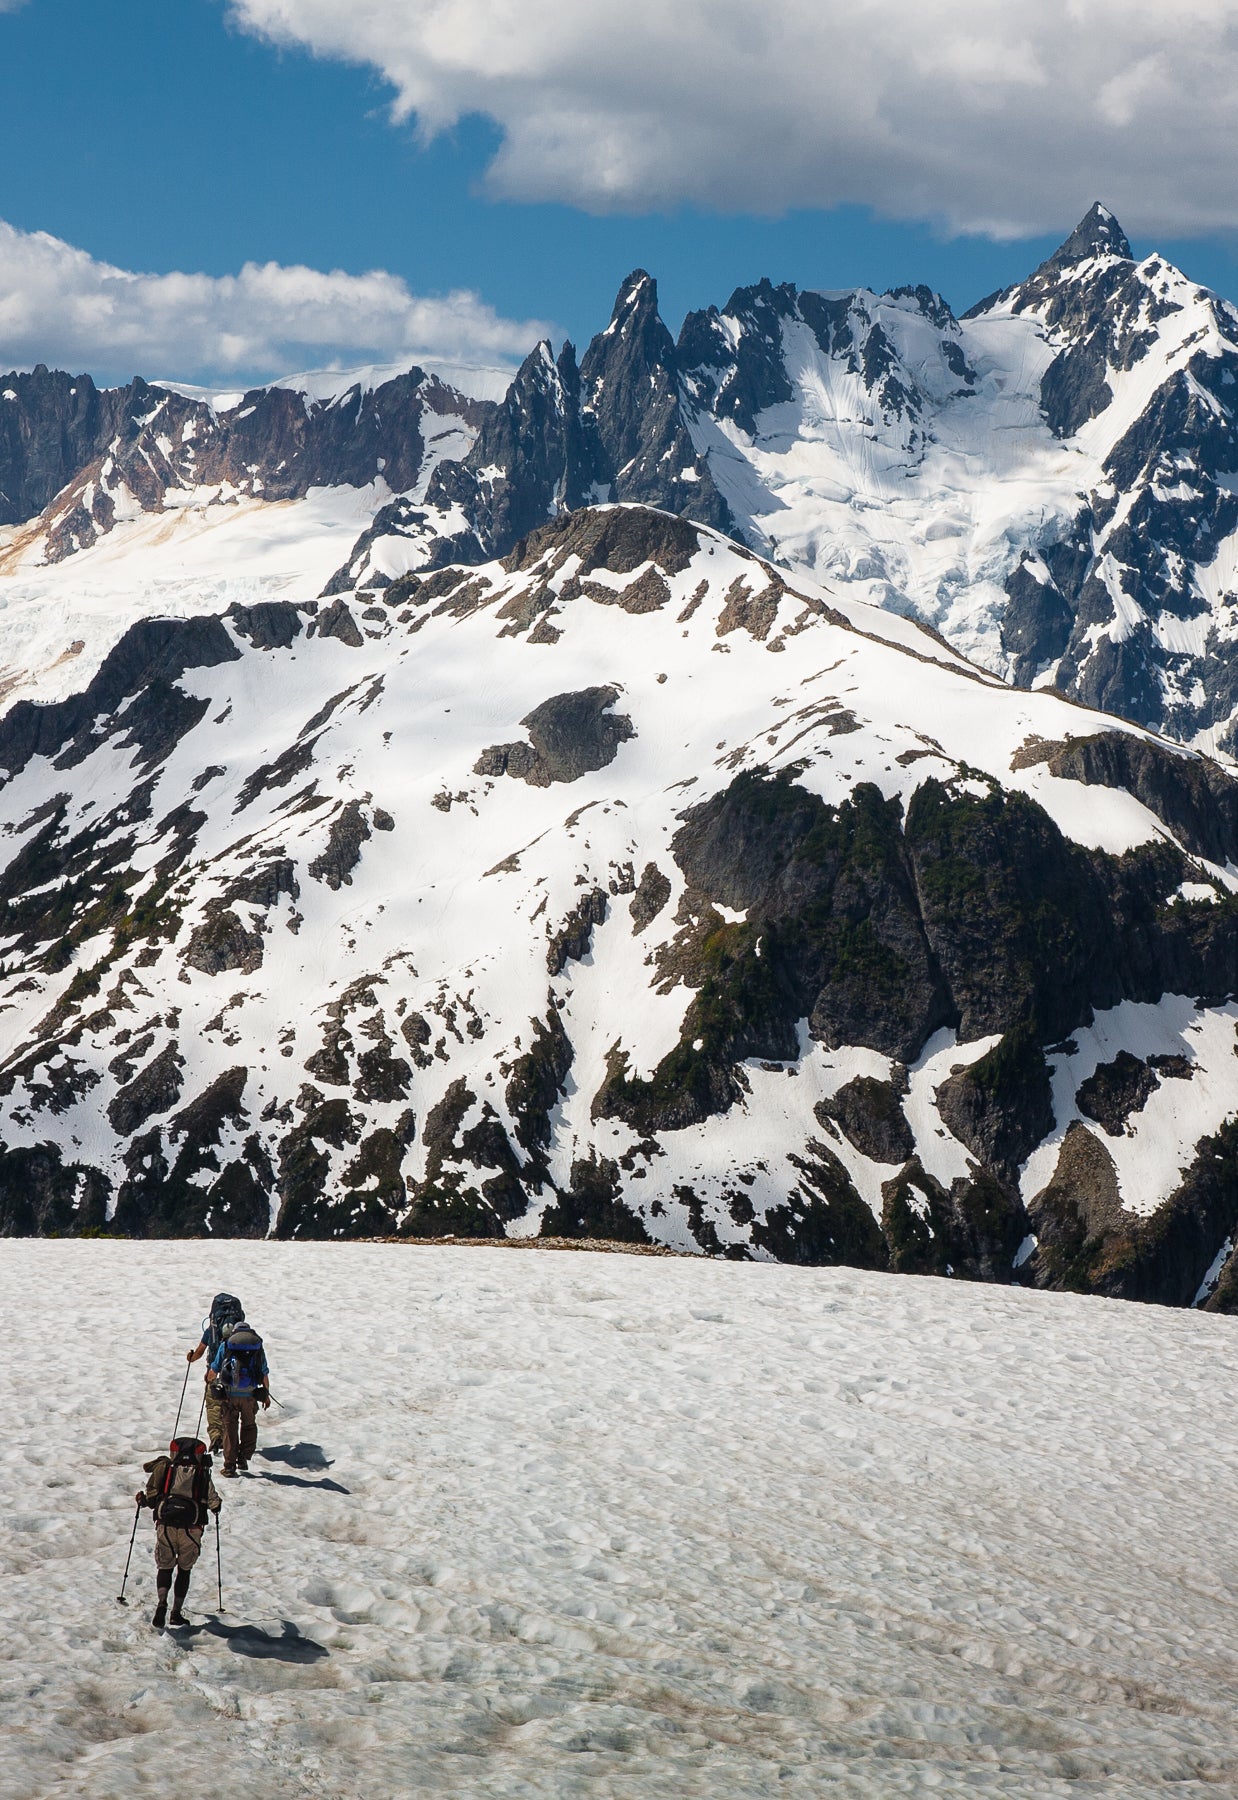 Hiking Mt. Baker and the North Cascades: Selected Walks Around Koma Kulshan (Mt. Baker) & the North Cascades